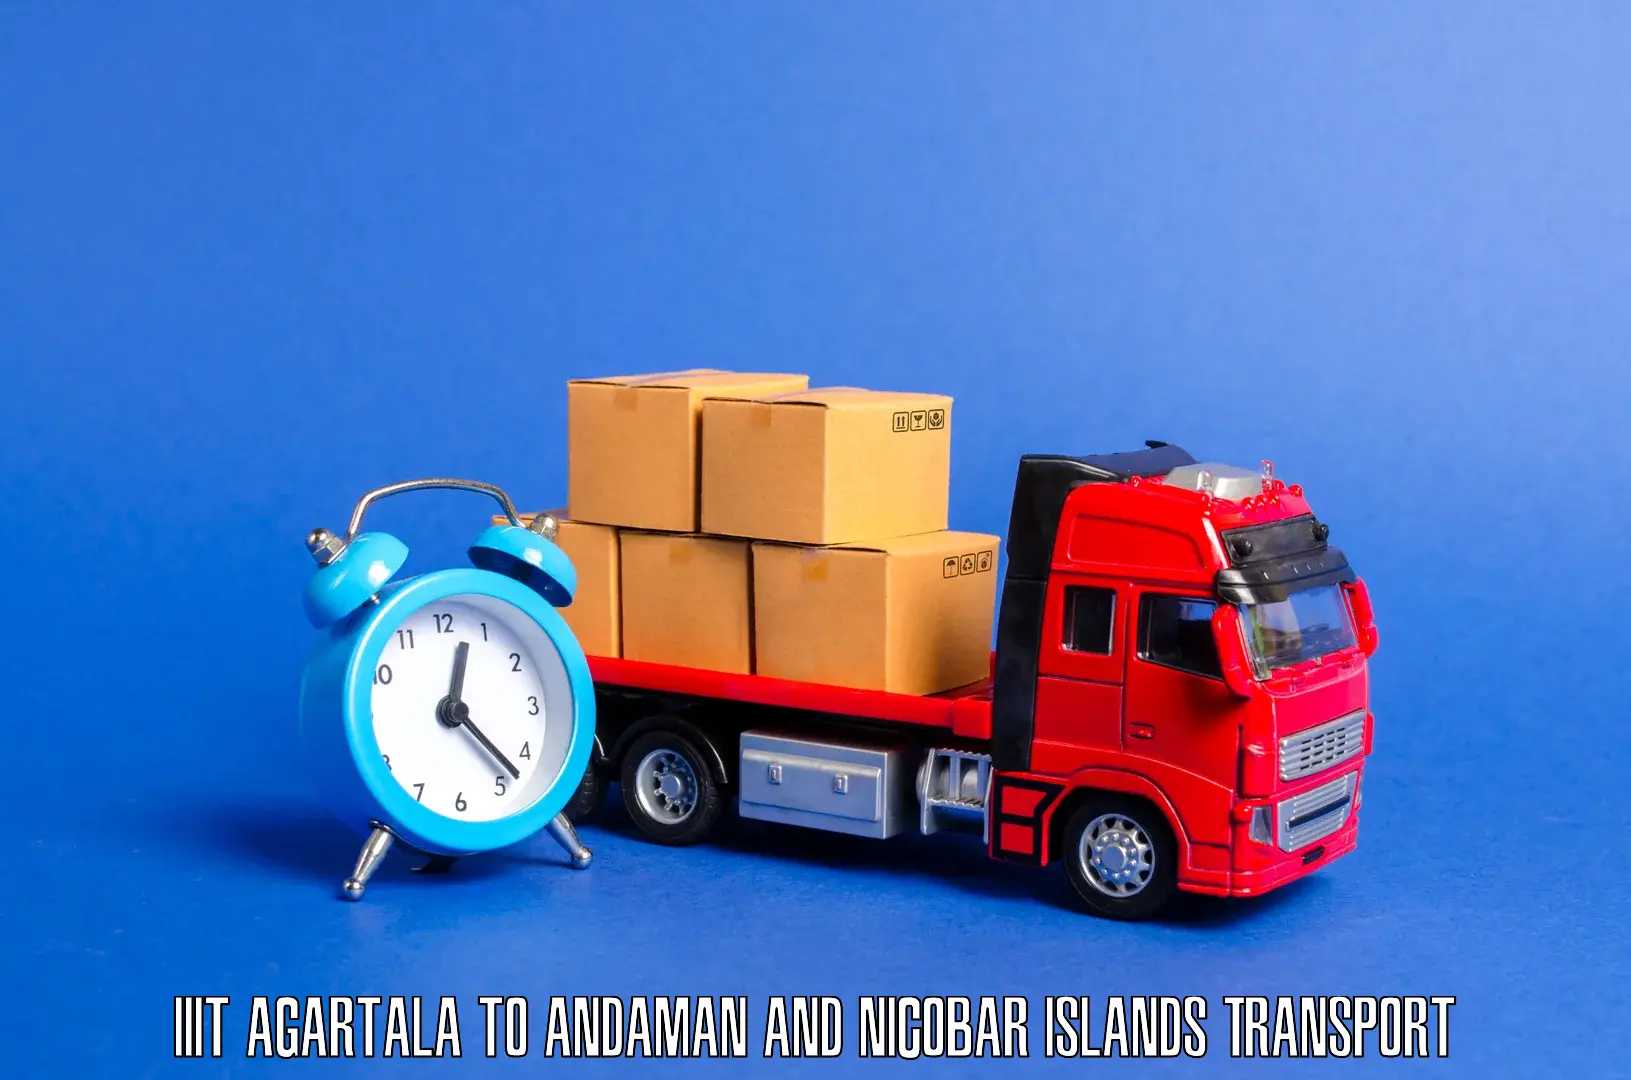 Parcel transport services IIIT Agartala to Andaman and Nicobar Islands